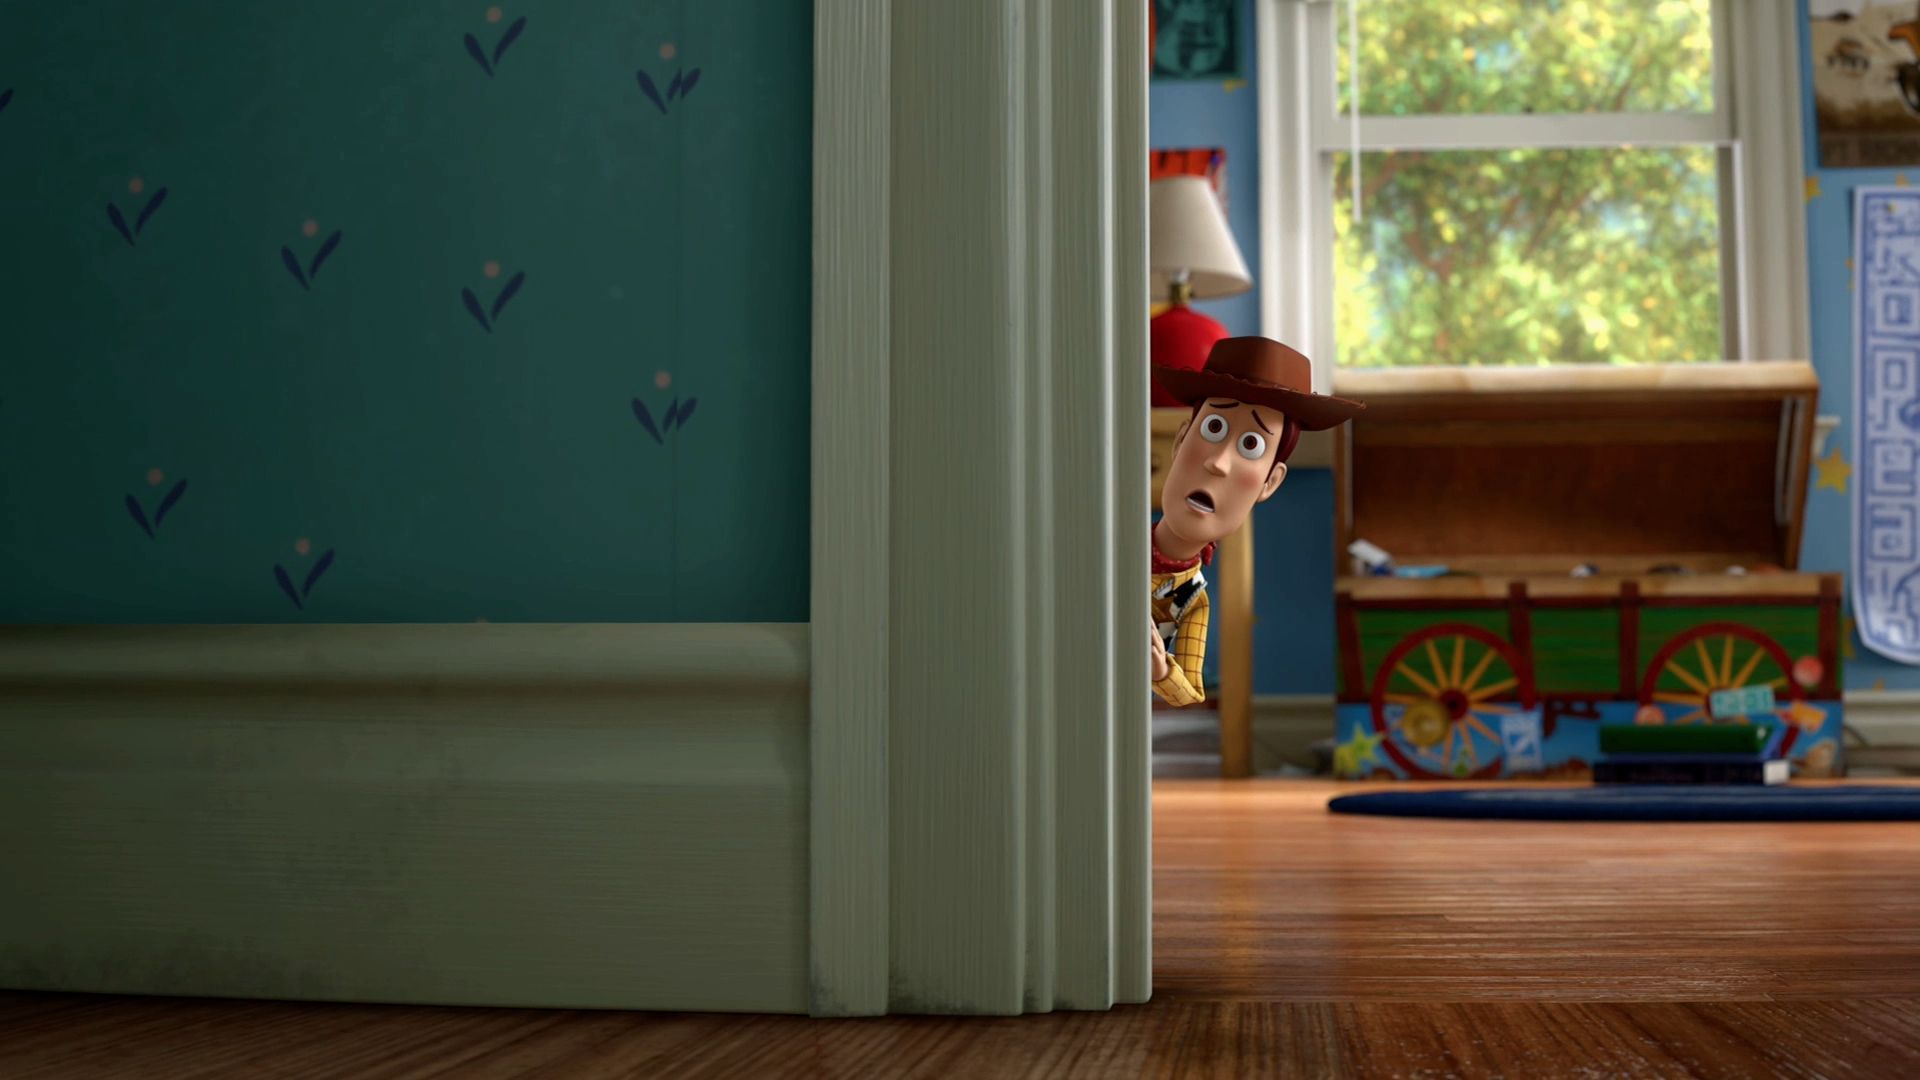 Toy Story Computer Wallpapers, Desktop Backgrounds 1920x1080